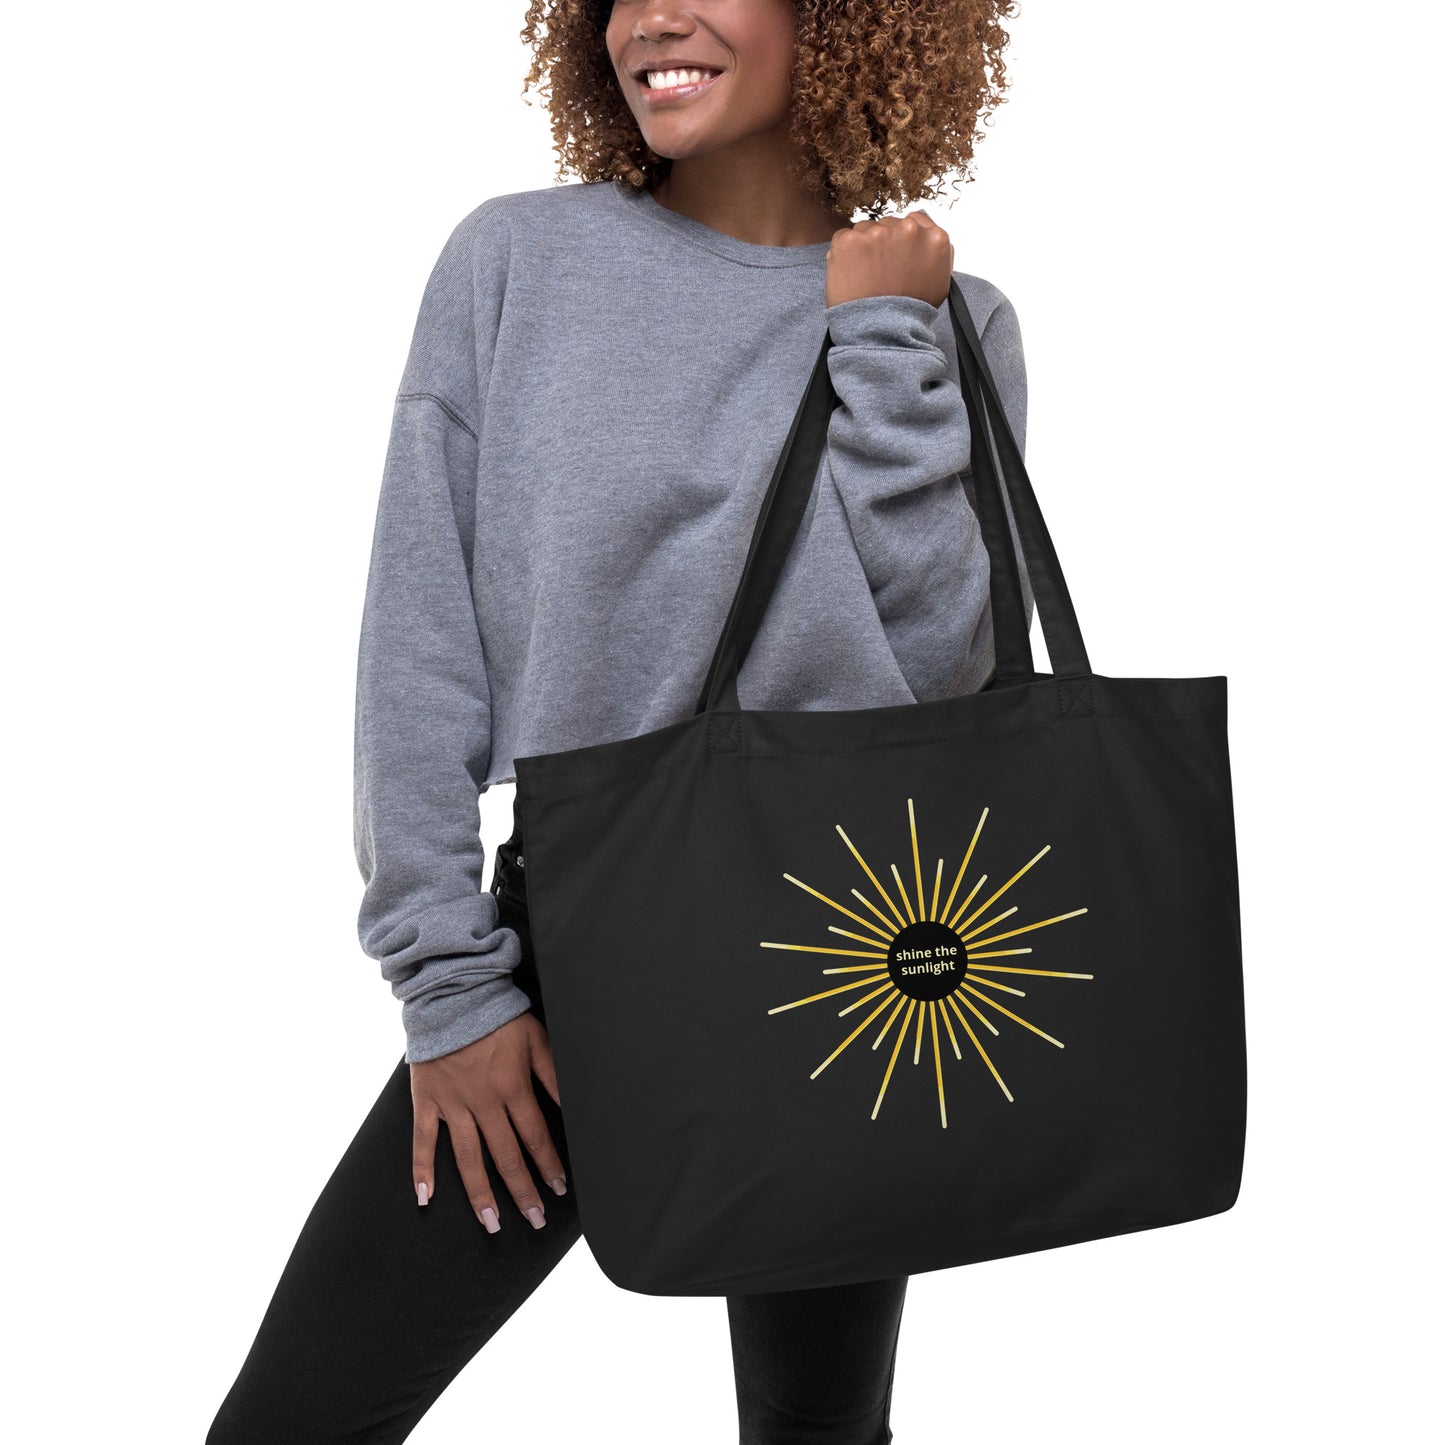 Shine the Sunlight Large Tote